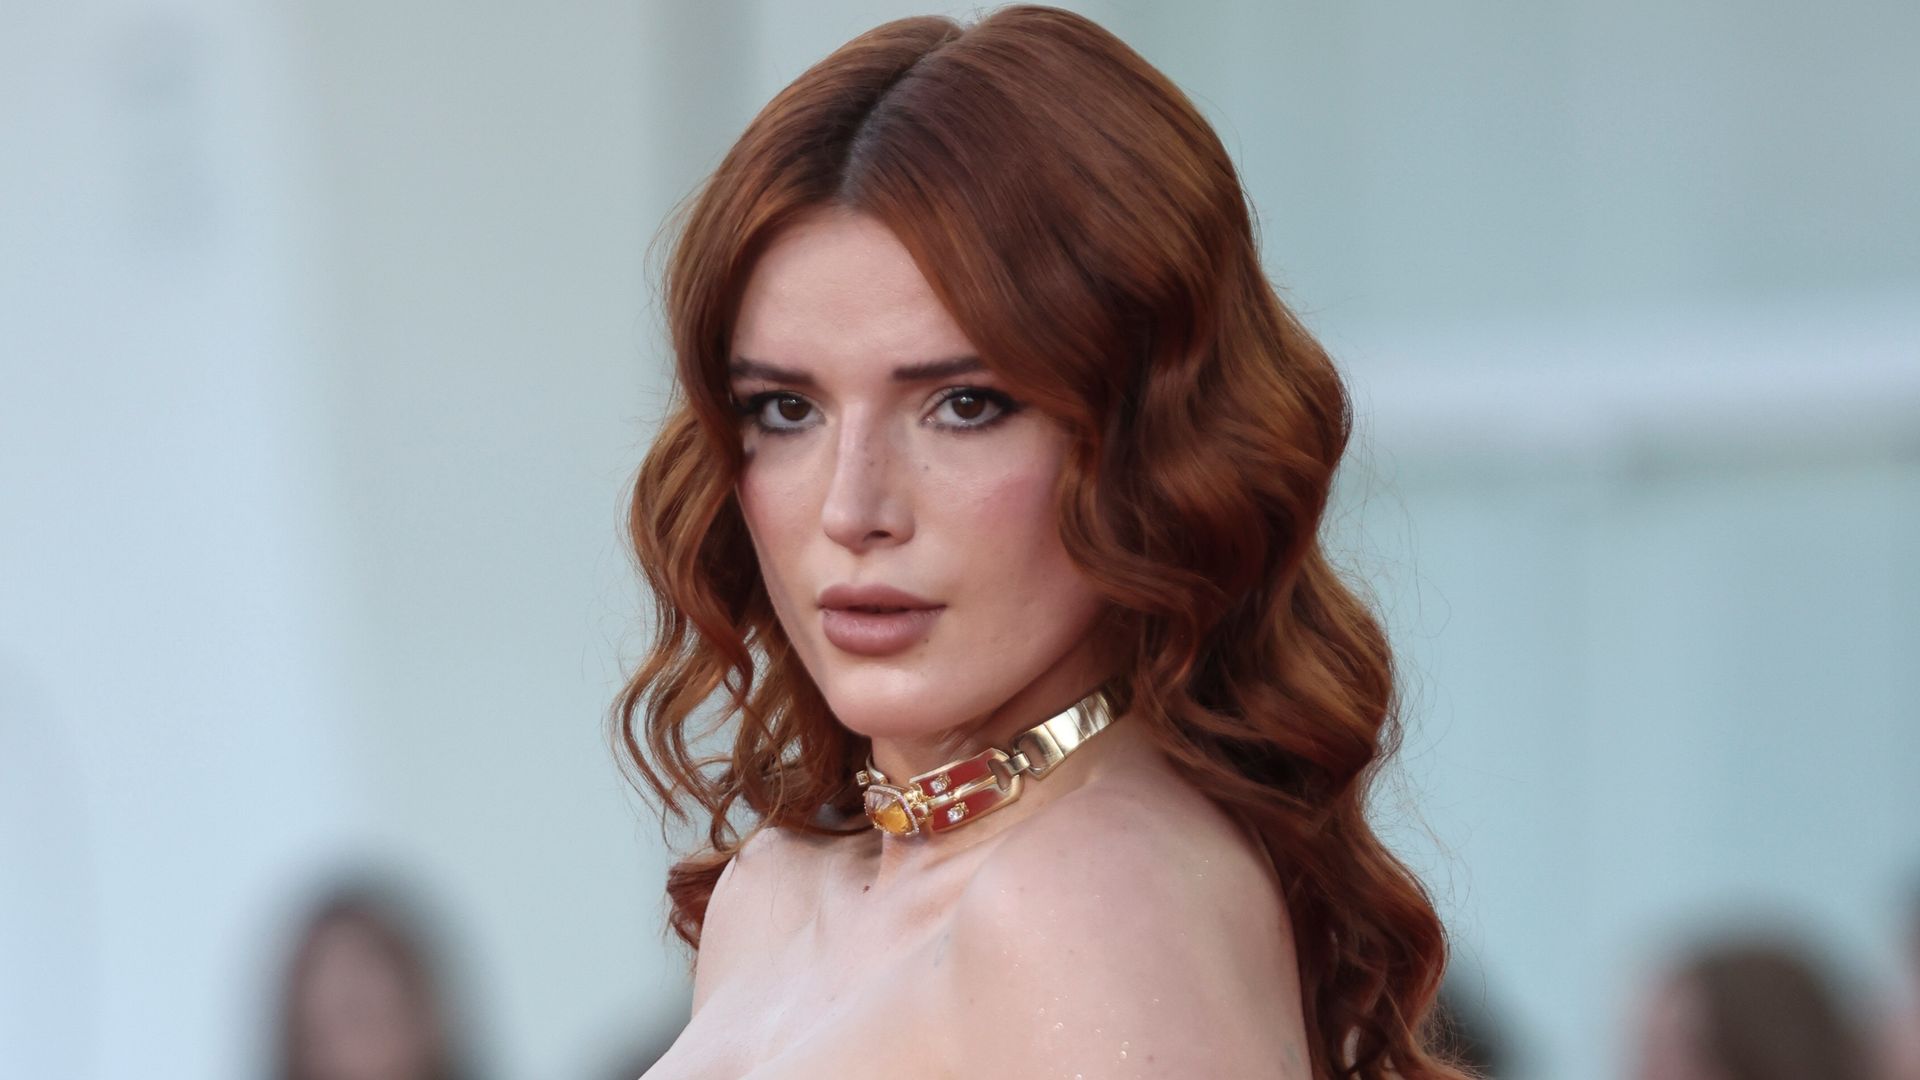 VENICE, ITALY - SEPTEMBER 04: Bella Thorne attends a red carpet for the movie "Priscilla" at the 80th Venice International Film Festival on September 04, 2023 in Venice, Italy. (Photo by Alessandra Benedetti - Corbis/Corbis via Getty Images,)